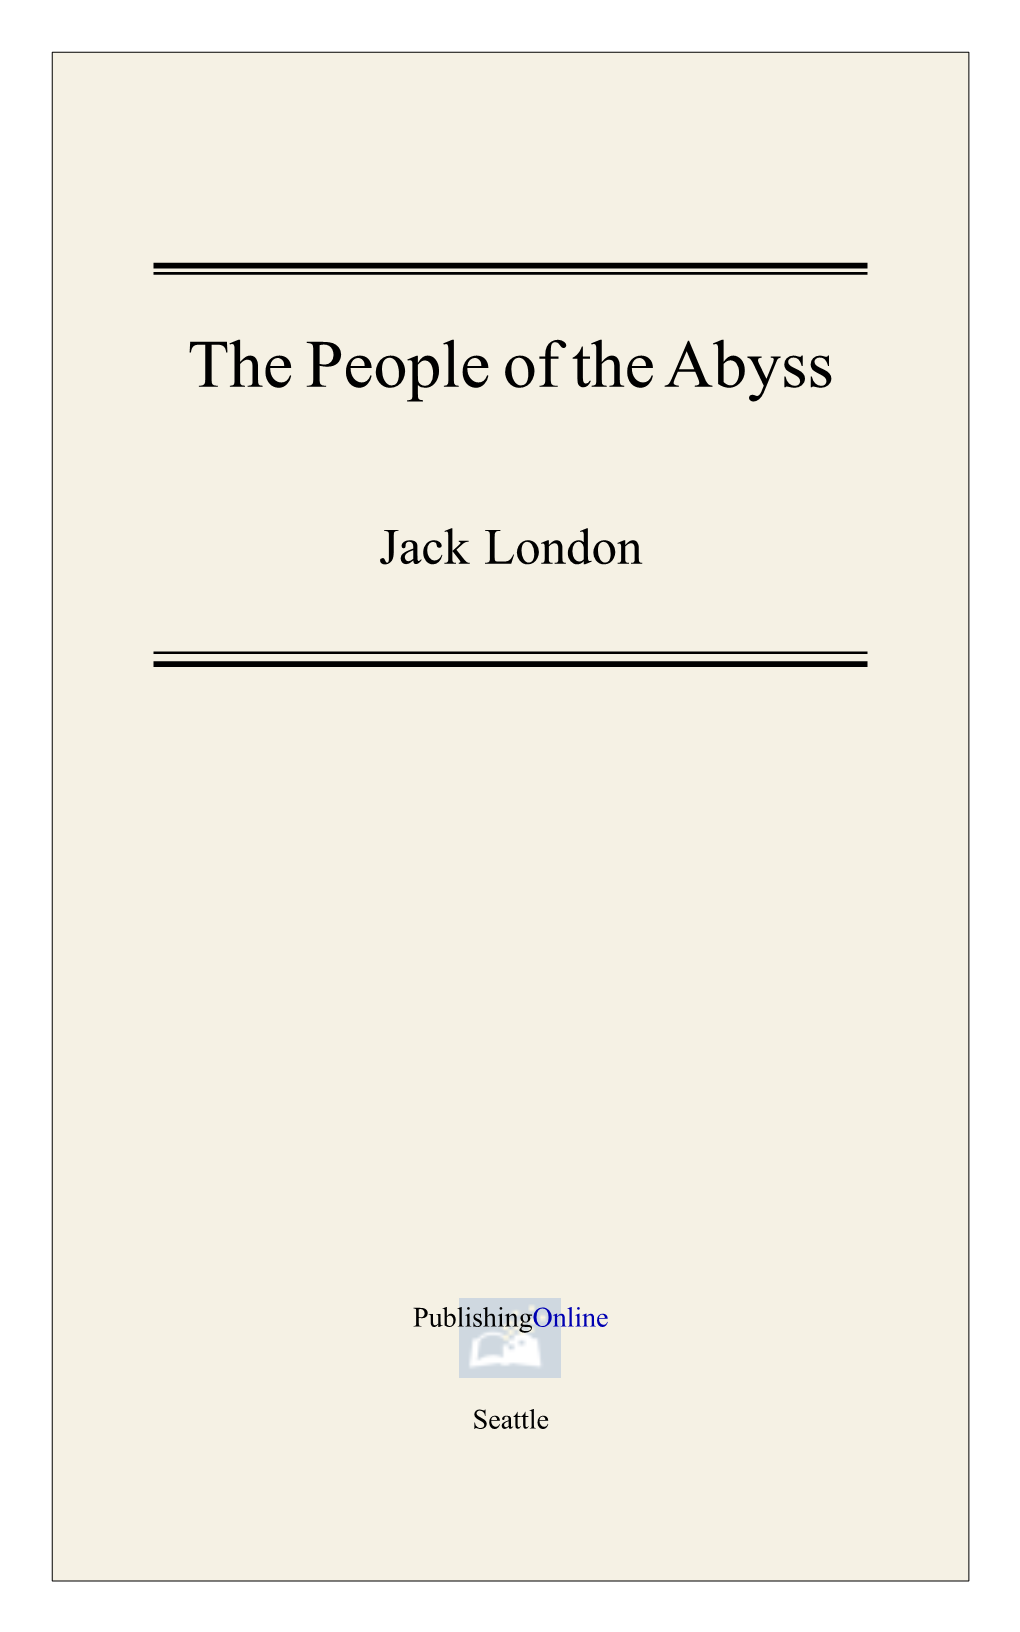 People of the Abyss Jack London